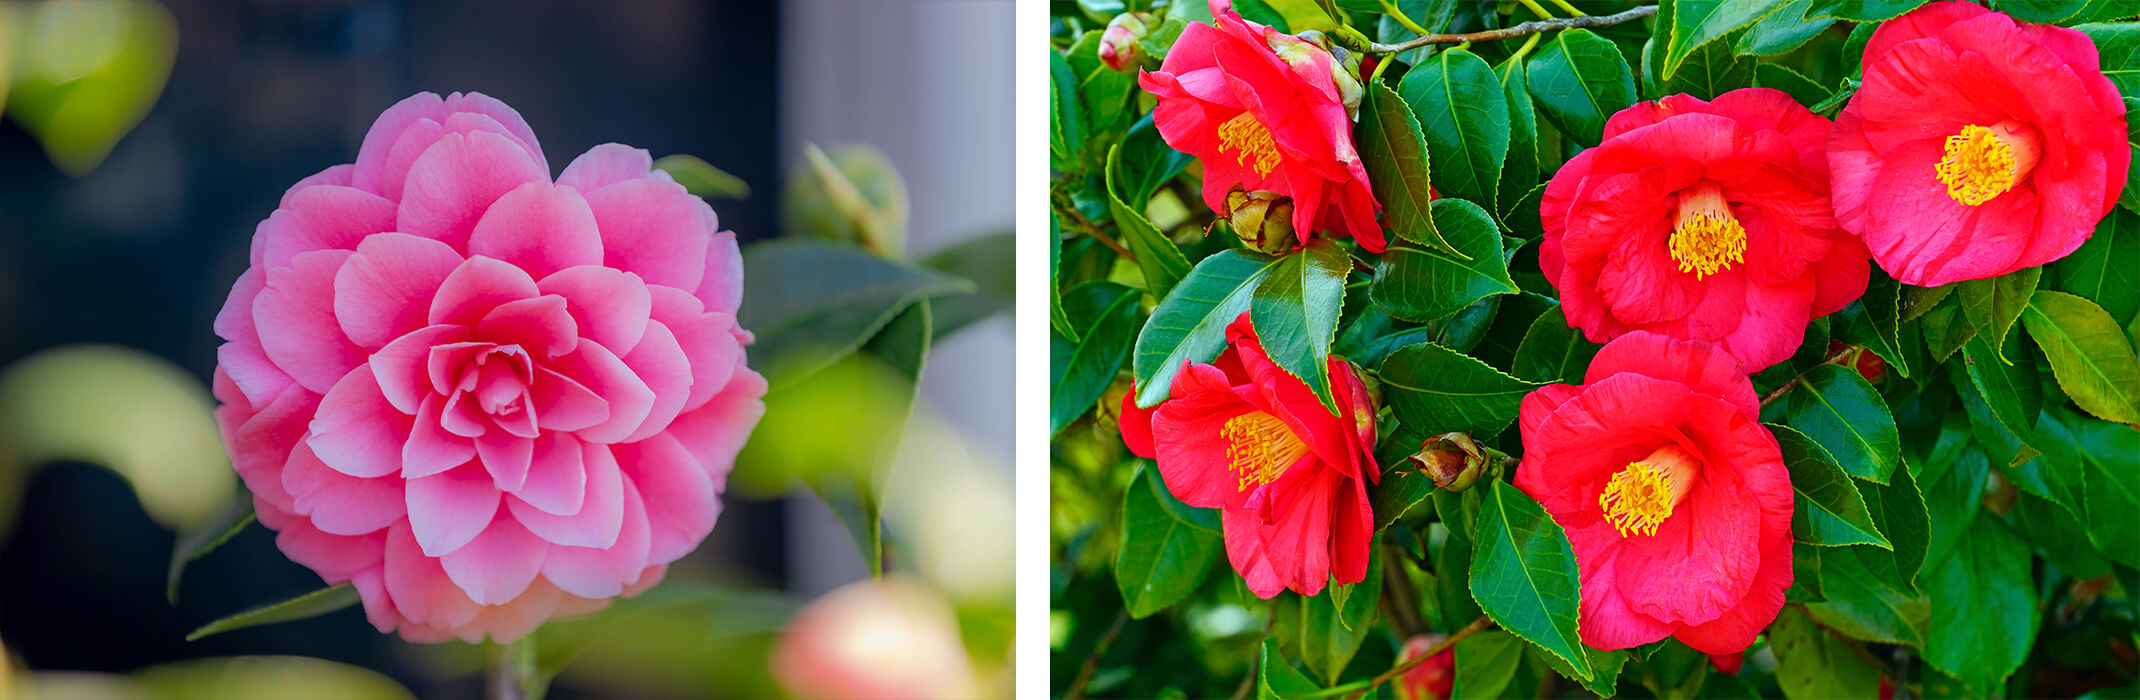 2 images: a closeup of a light pink camellia japonica in the garden and a bright hot pink camellia bush with many flowers in bloom